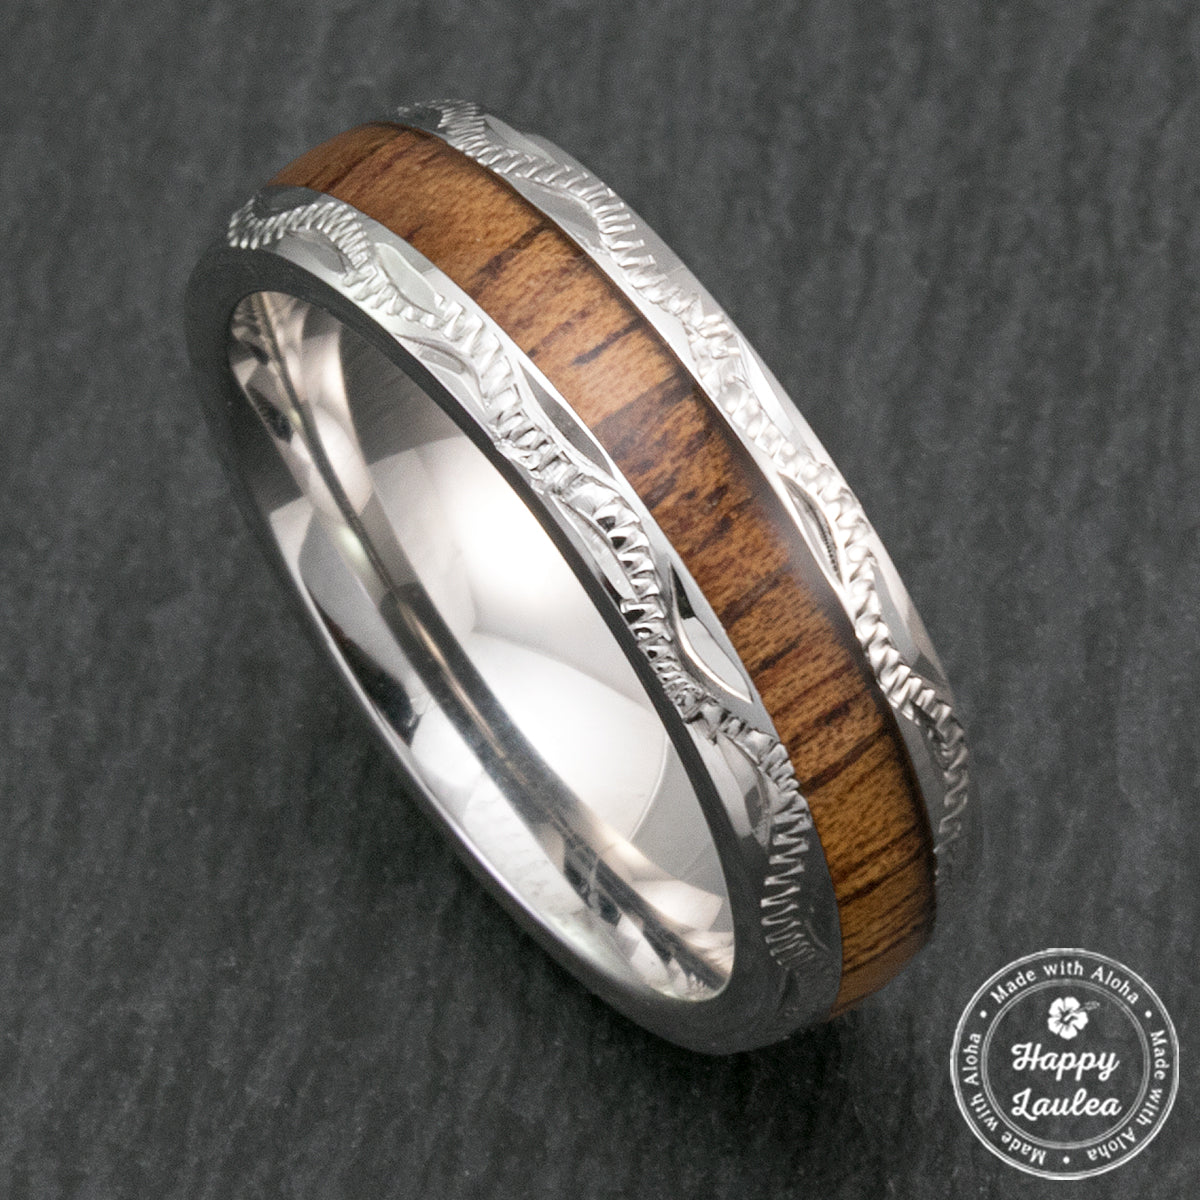 Sterling Silver Hand Engraved Hawaiian Jewelry Ring with Koa Wood Inlay - 8mm, Dome Shape, Comfort Fitment